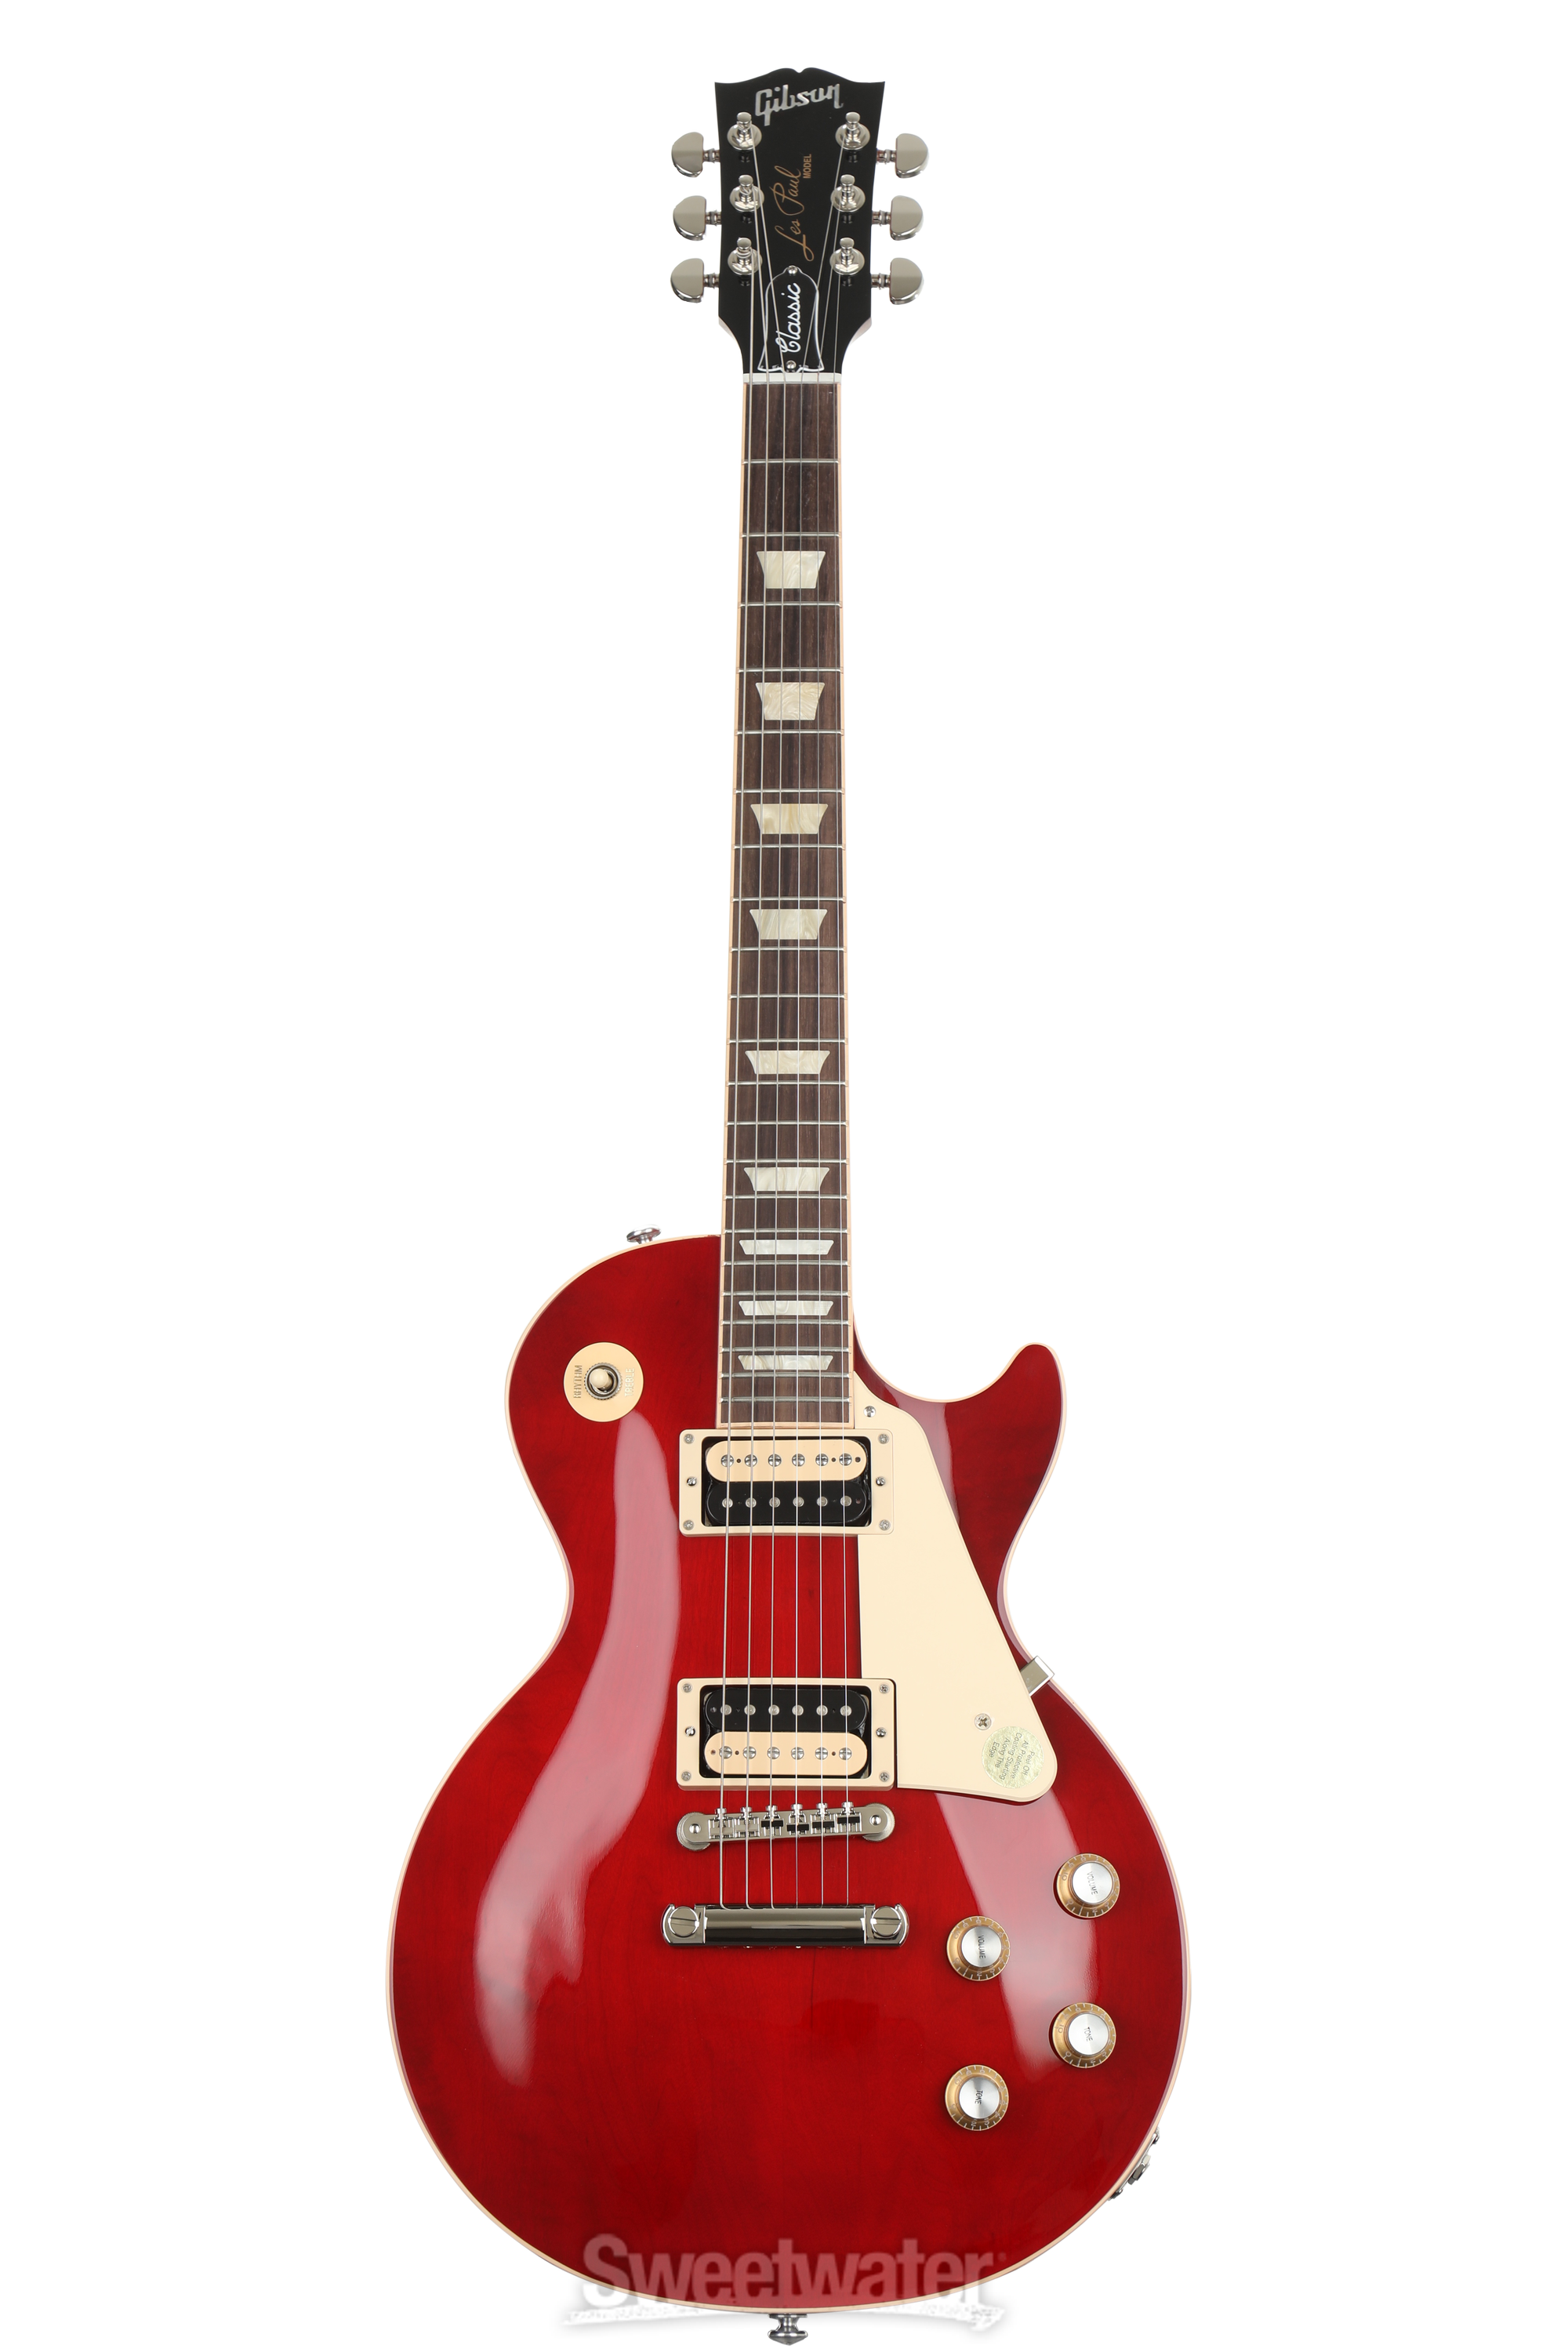 Used Gibson Les Paul Classic Electric Guitar - Translucent Cherry